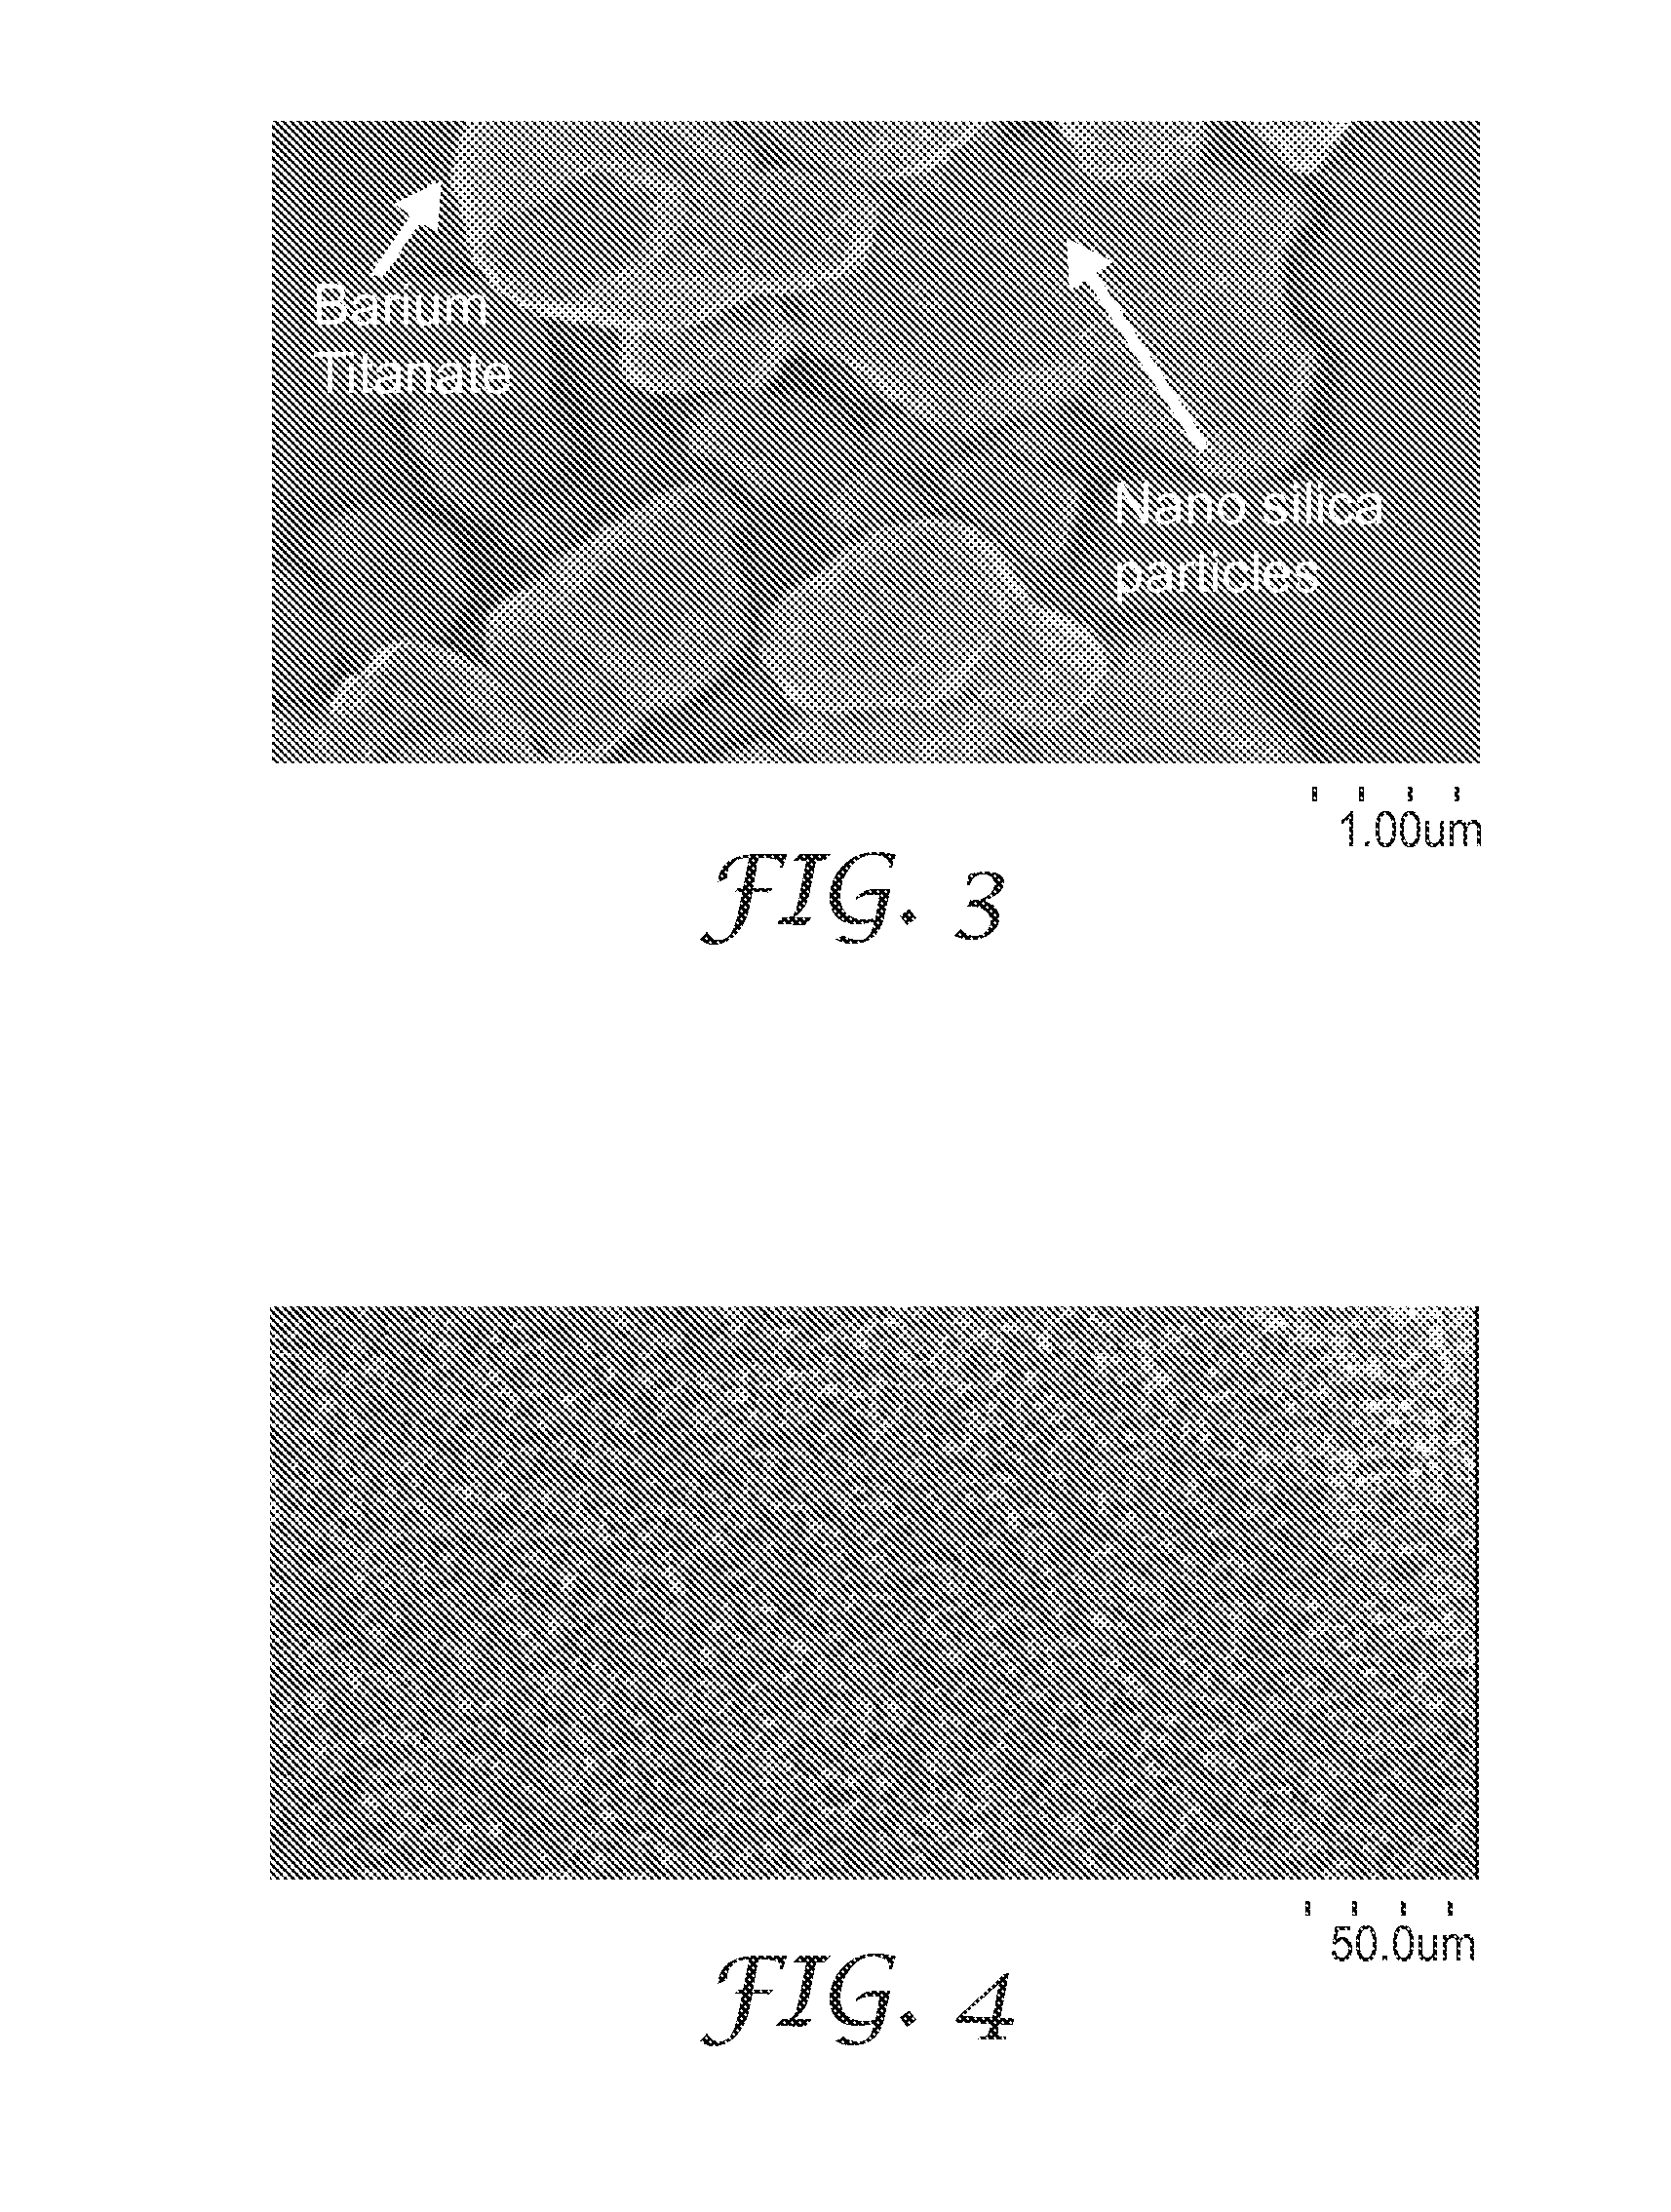 Dielectric material with non-linear dielectric constant